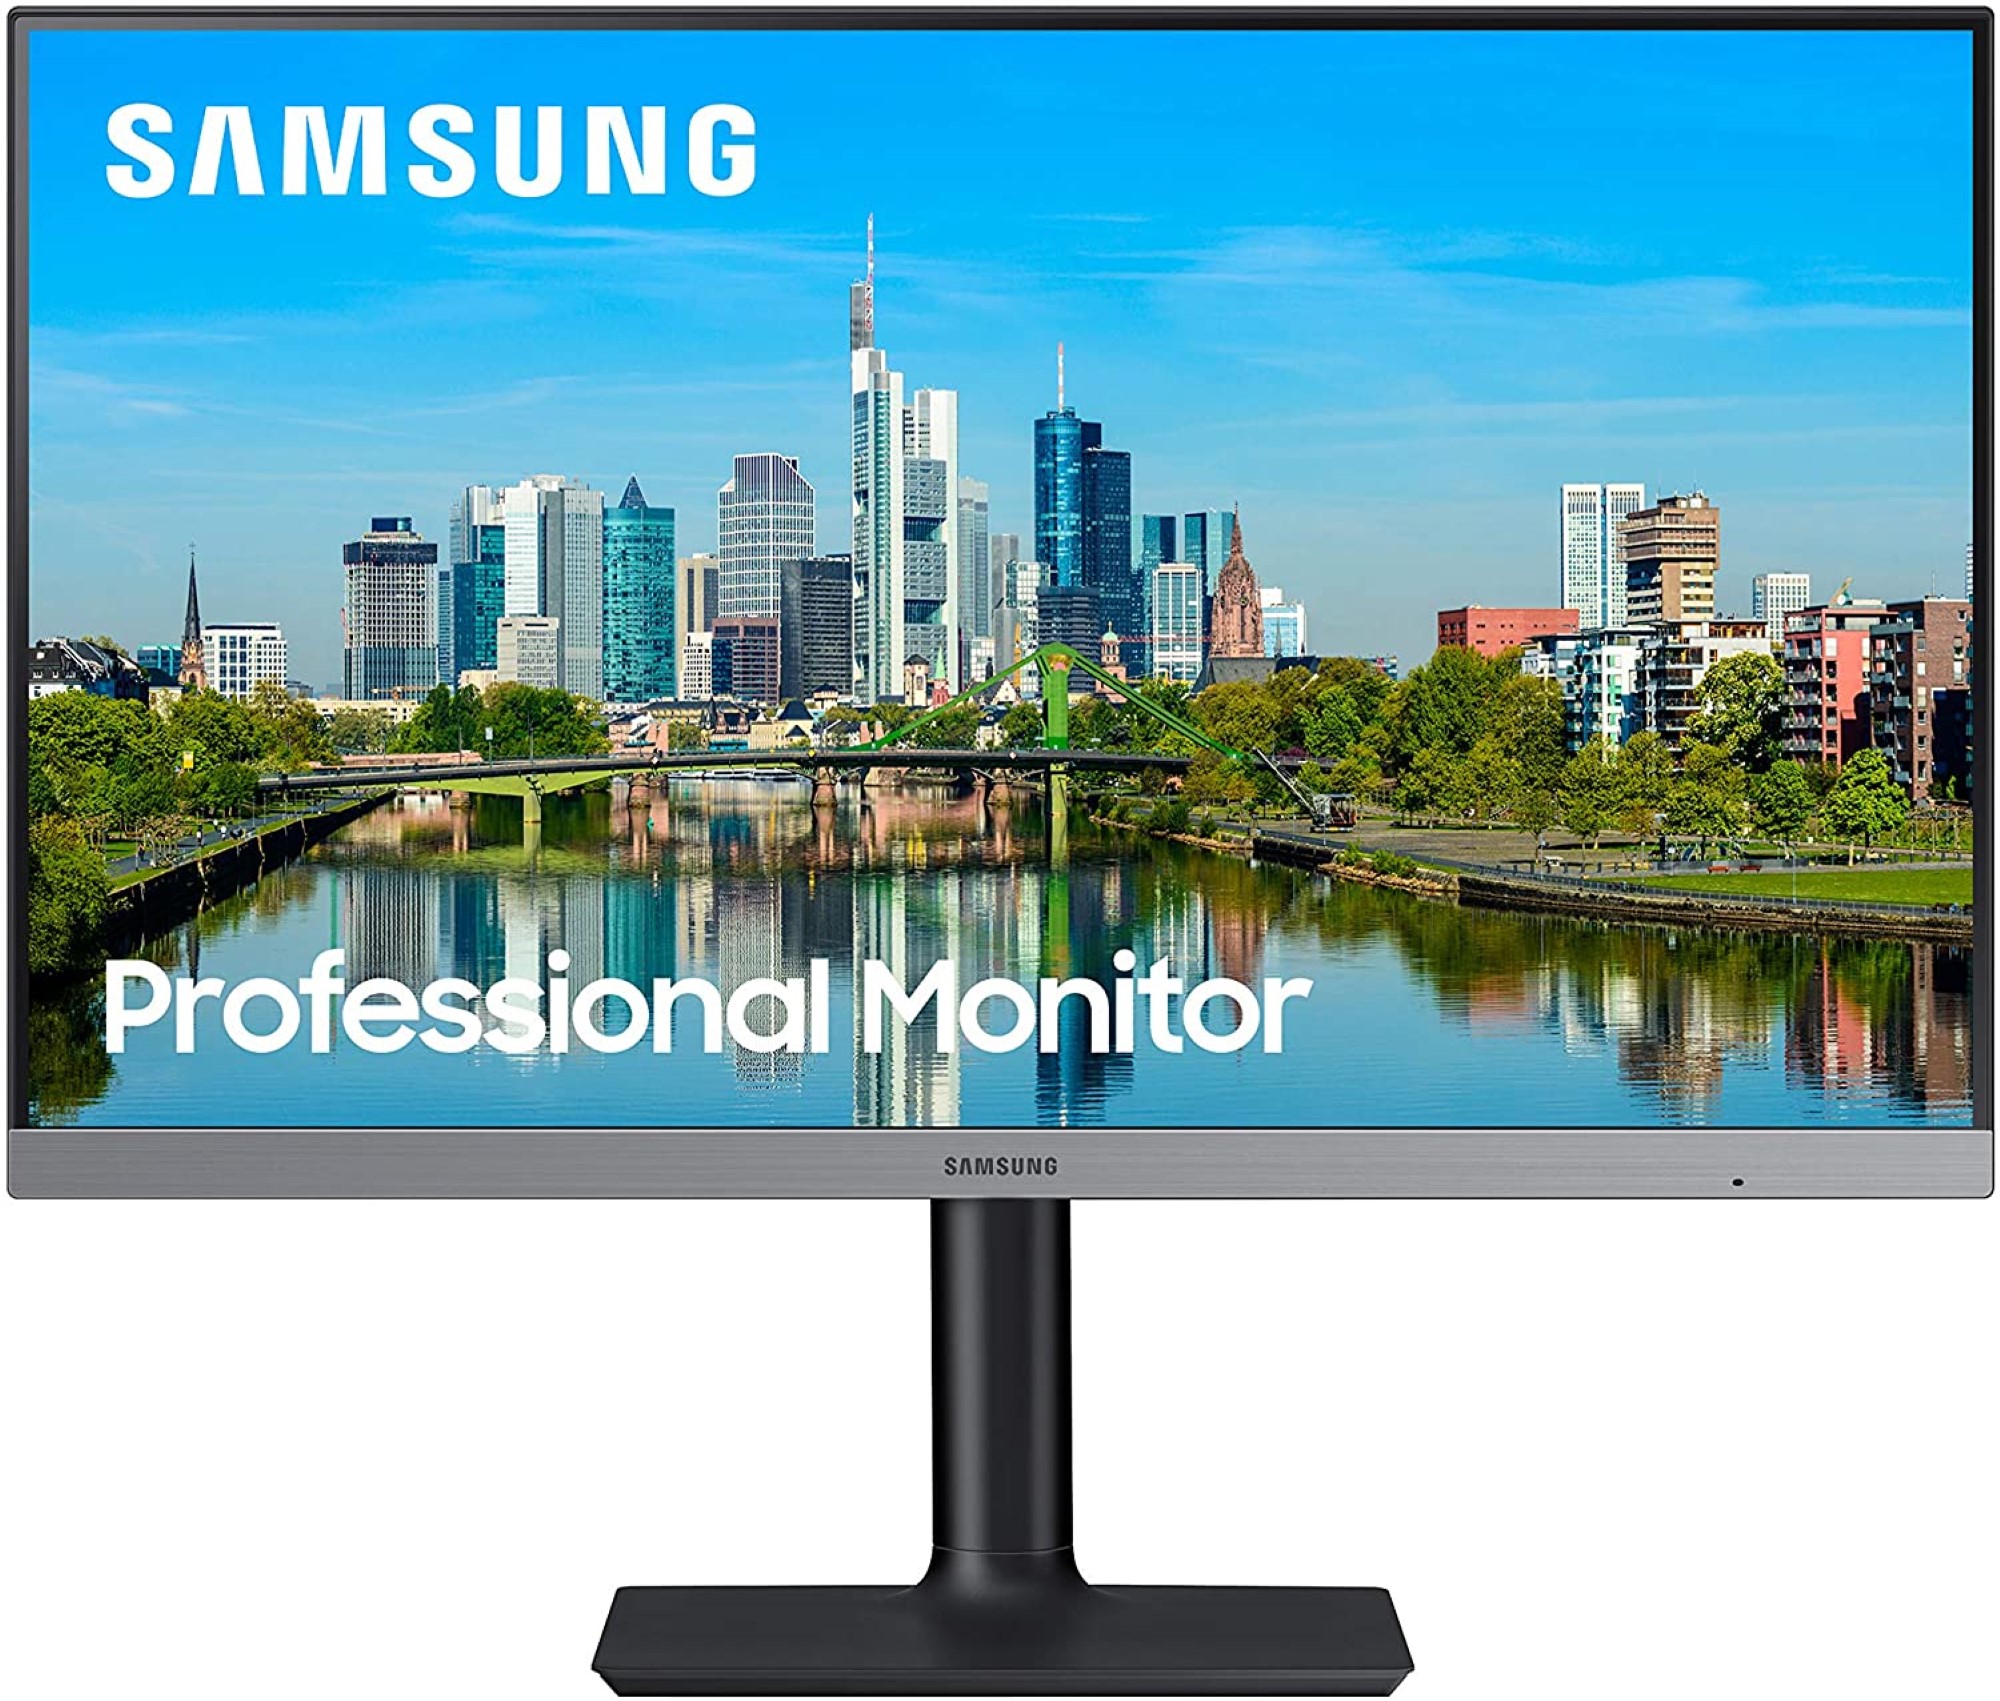 Samsung F24T650FYN Business FT650 24 inch 1080p 75Hz IPS Computer Monitor for Business with HDMI, DVI, DisplayPort, USB, HAS Stand - image 2 of 4